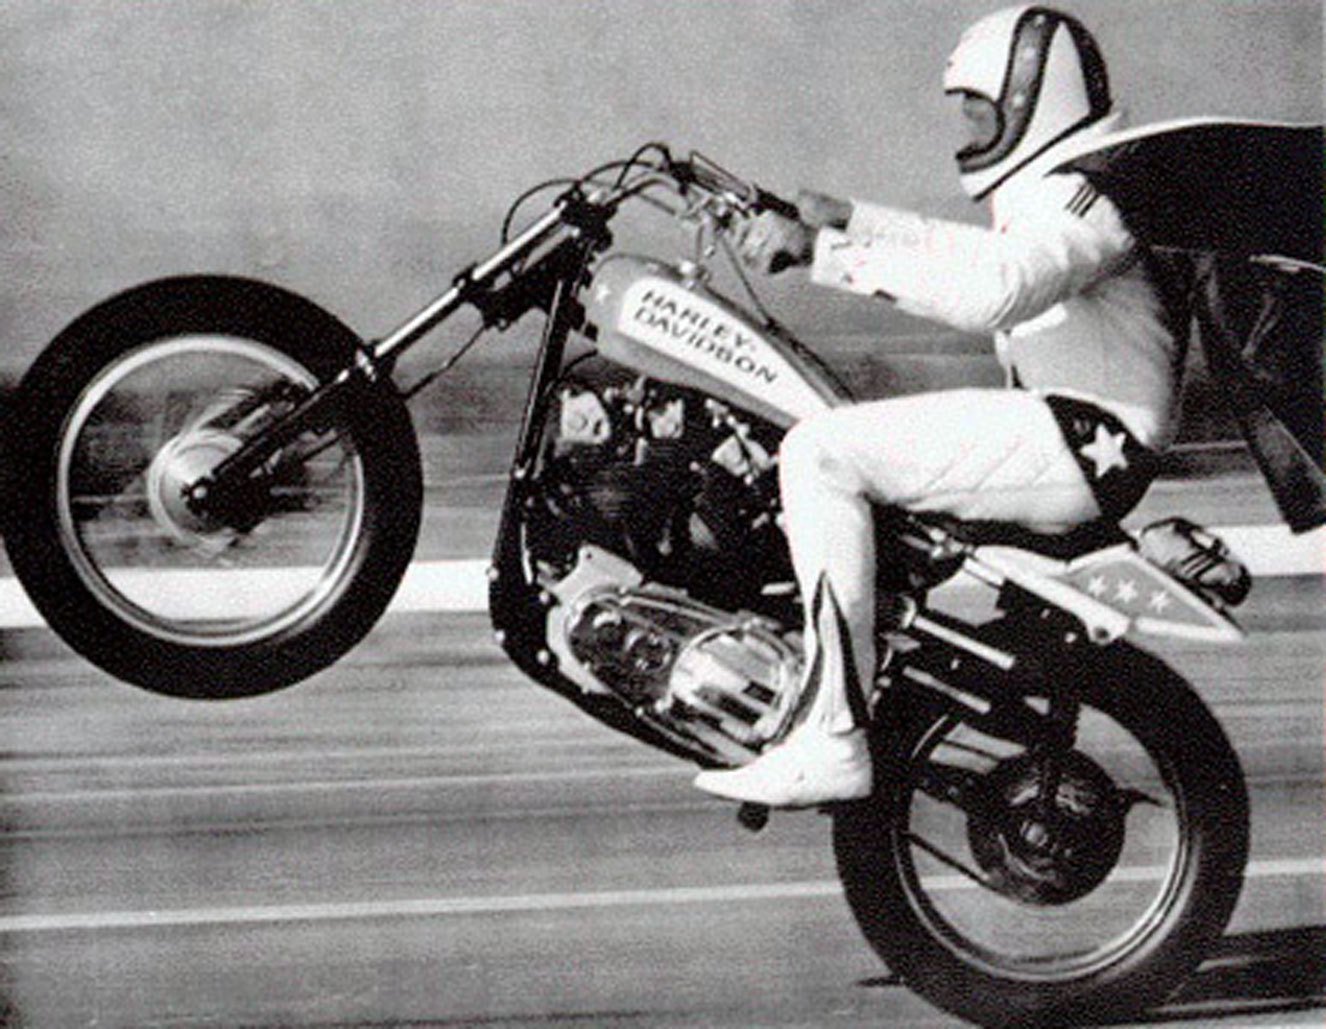 Evel Knievel on a Harley